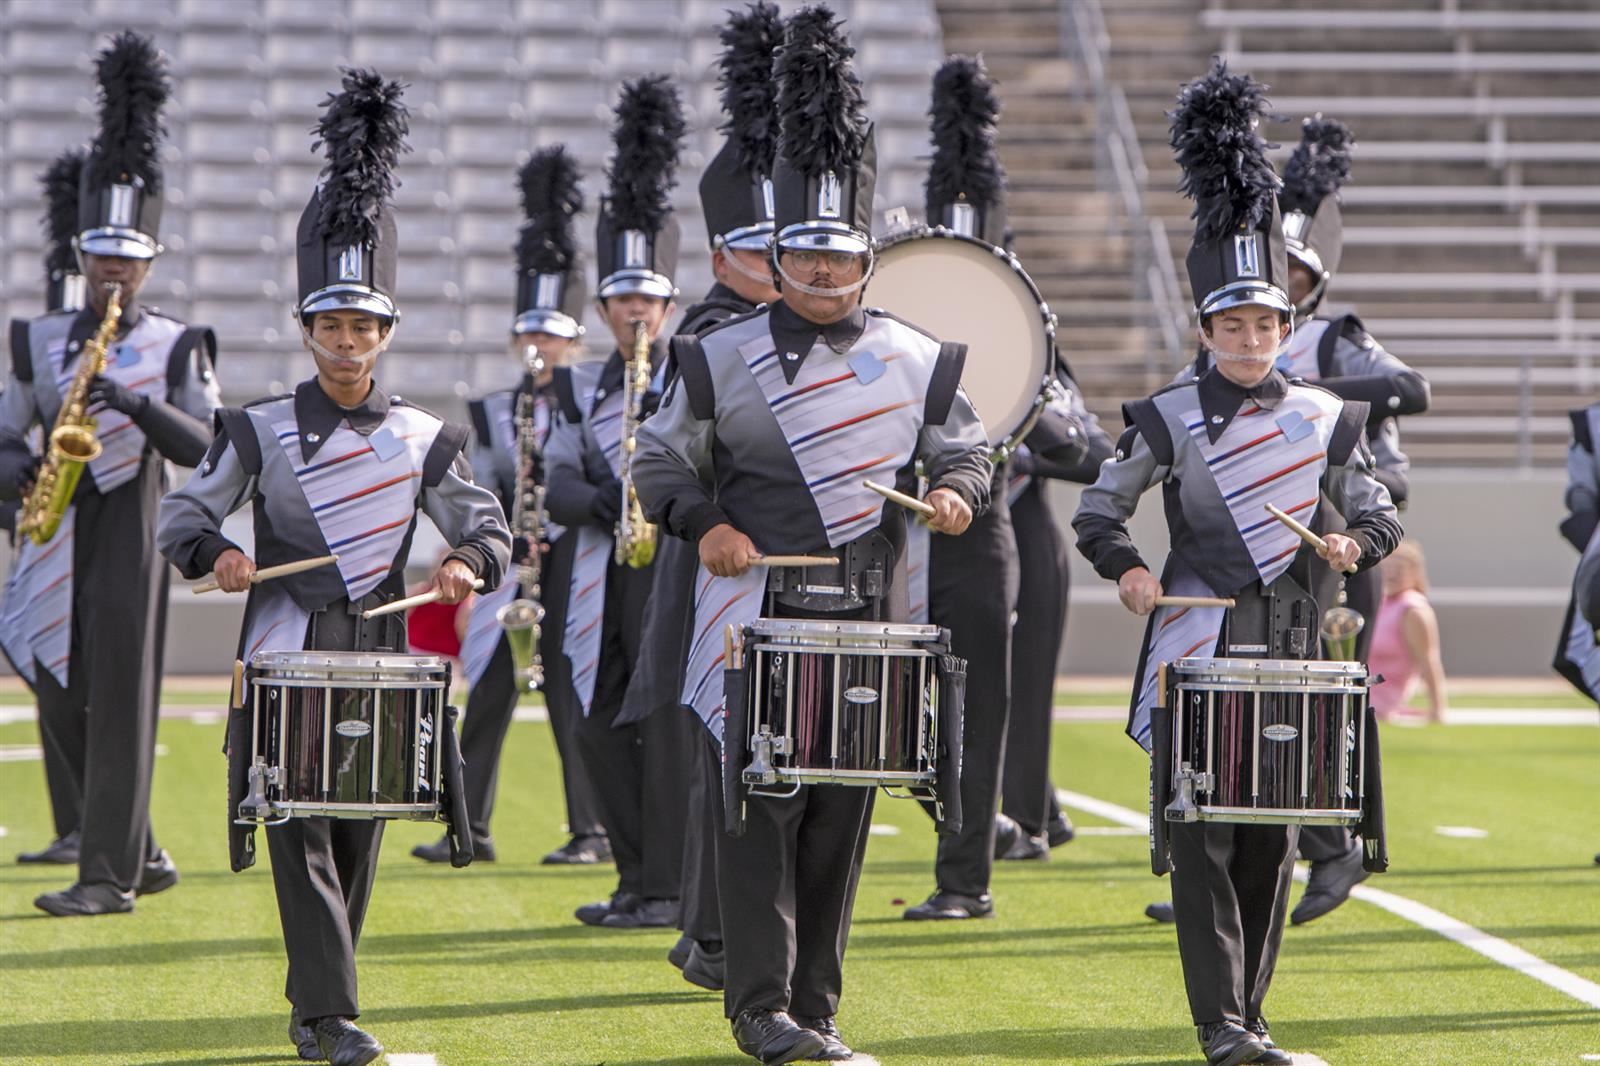 The Bridgeland High School marching band earned a second consecutive bid to the UIL State Marching Contest.